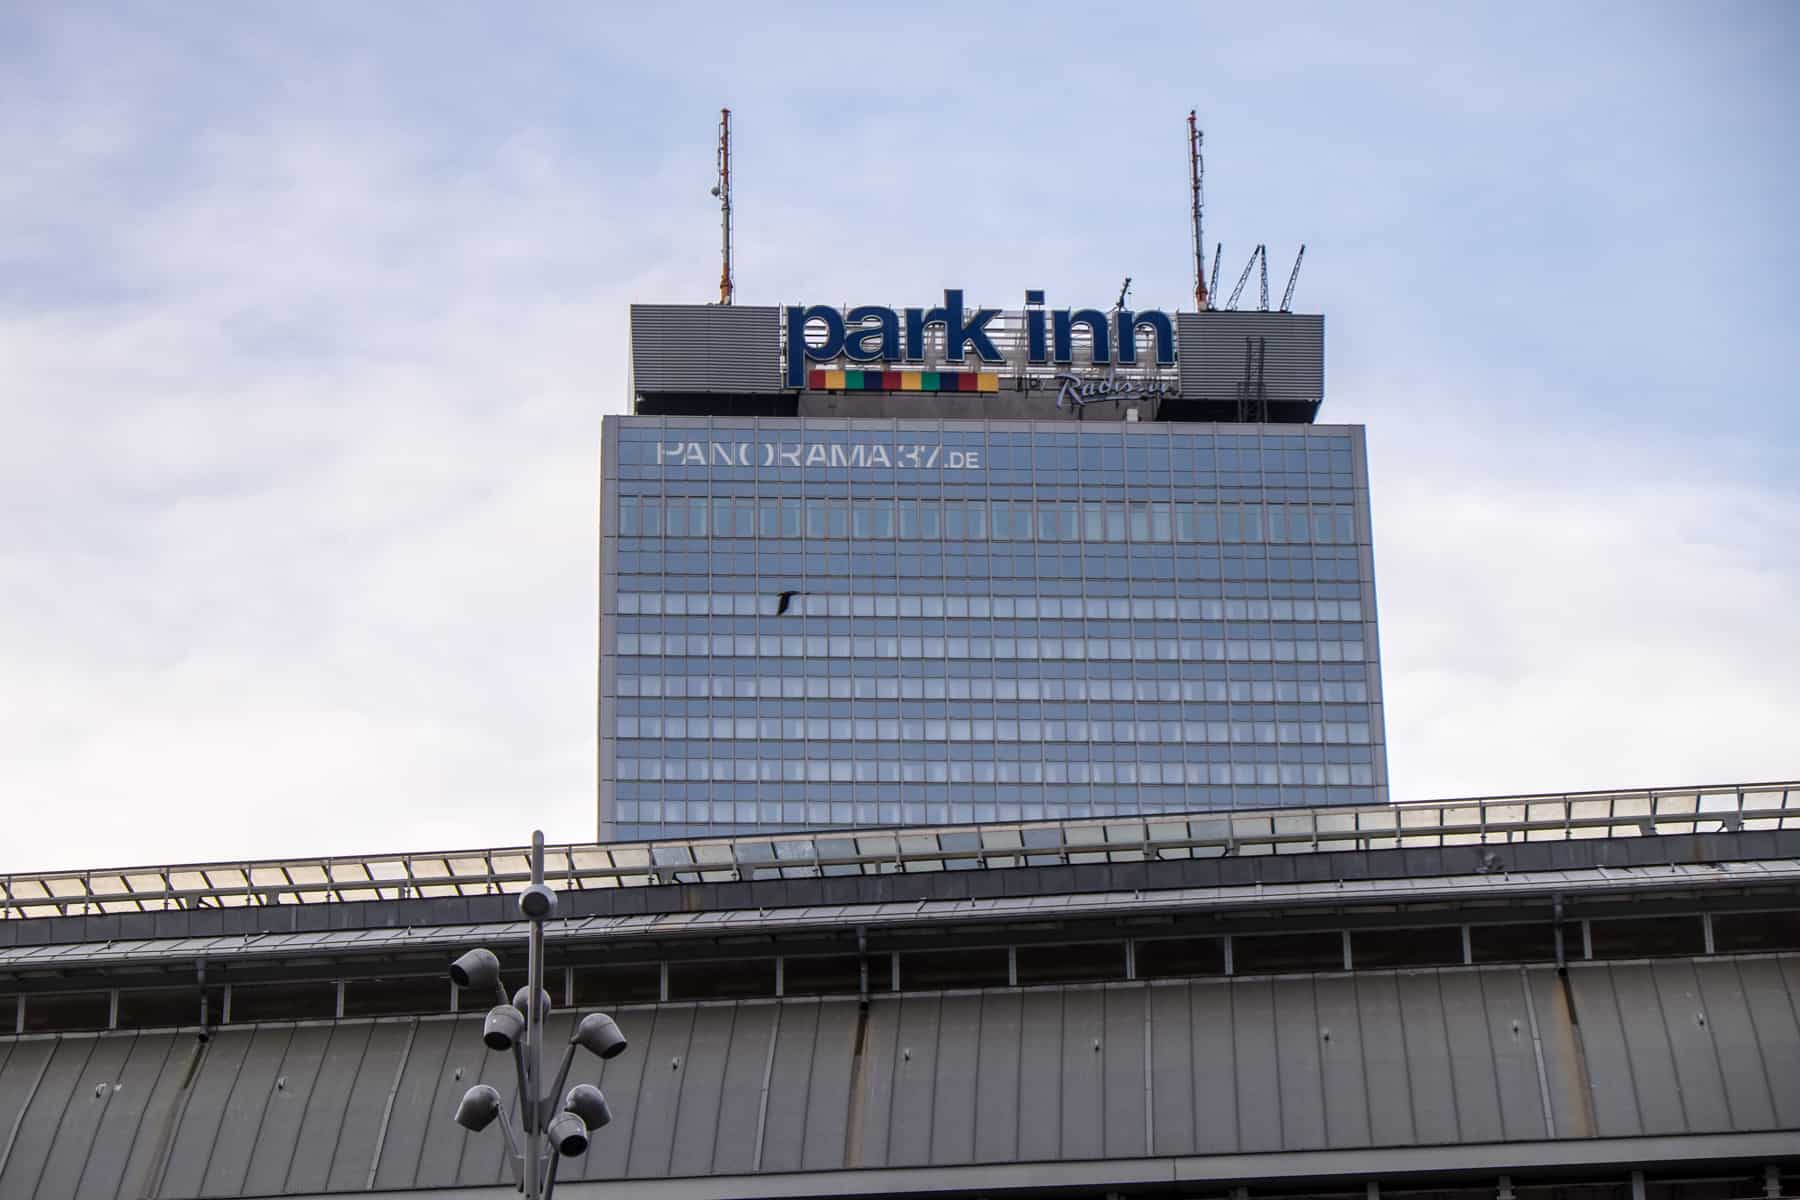 Exterior of the Park Inn Hotel in Berlin, where you can go base flying off its roof as seen by the cranes and set-up on the roof